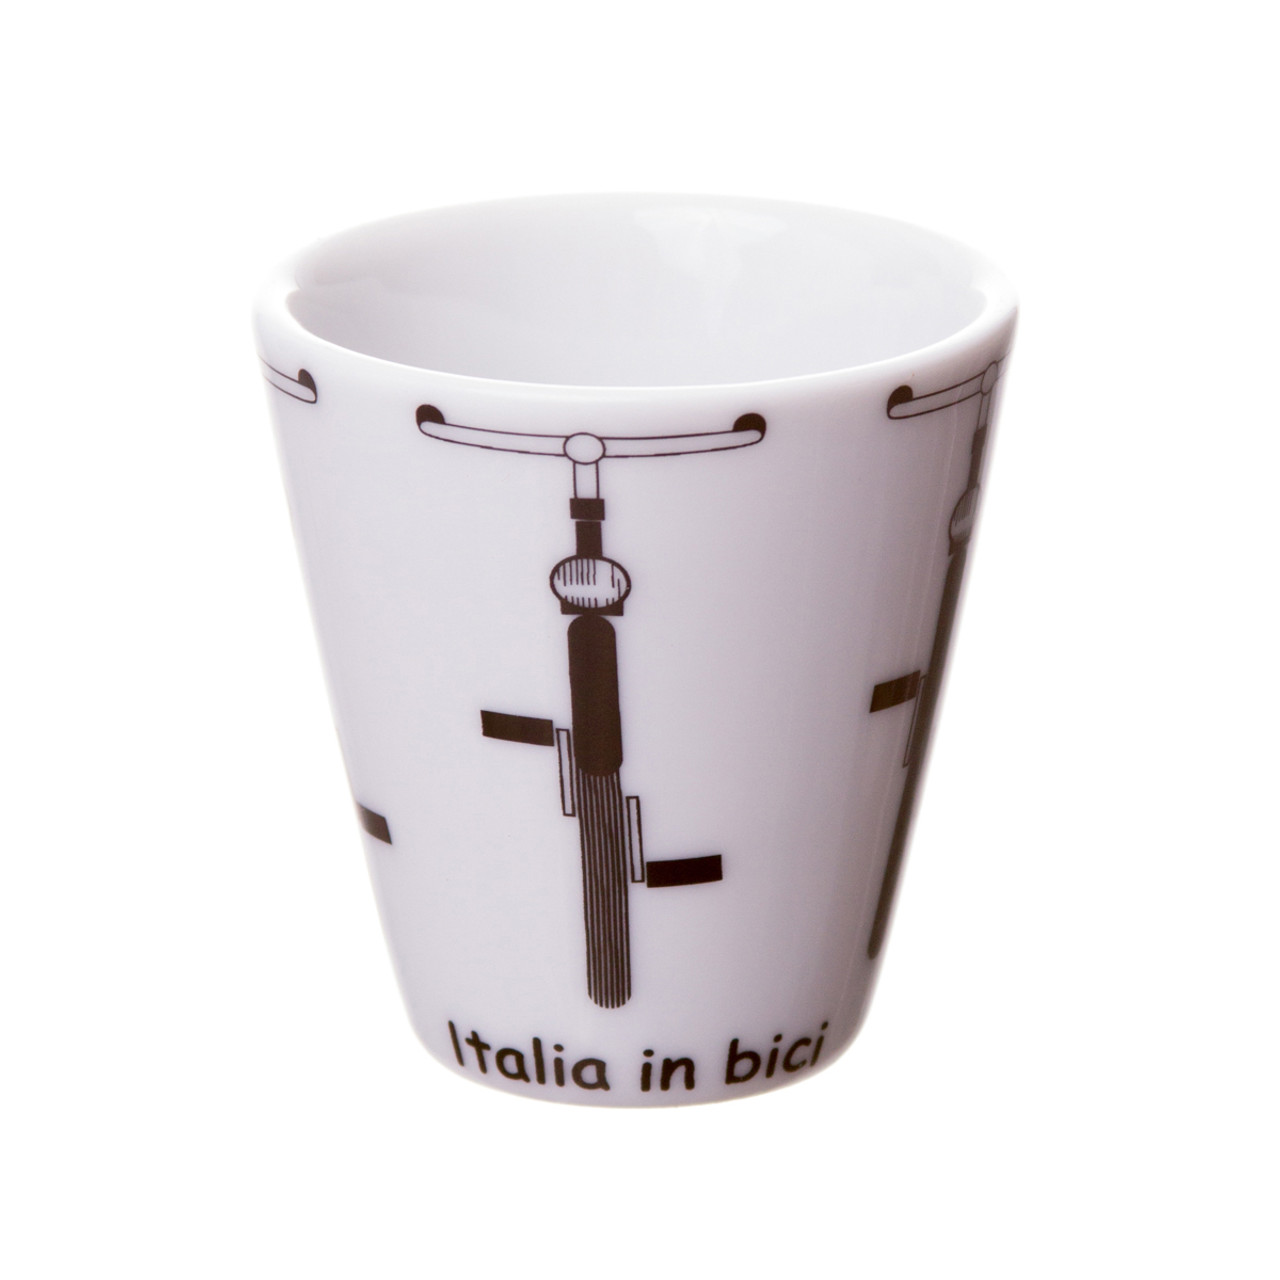 https://cdn11.bigcommerce.com/s-6h7ychjk4/images/stencil/1280x1280/products/8163/89218/italia-in-bici-espresso-cup-4-front__34312.1597181598.jpg?c=1&imbypass=on